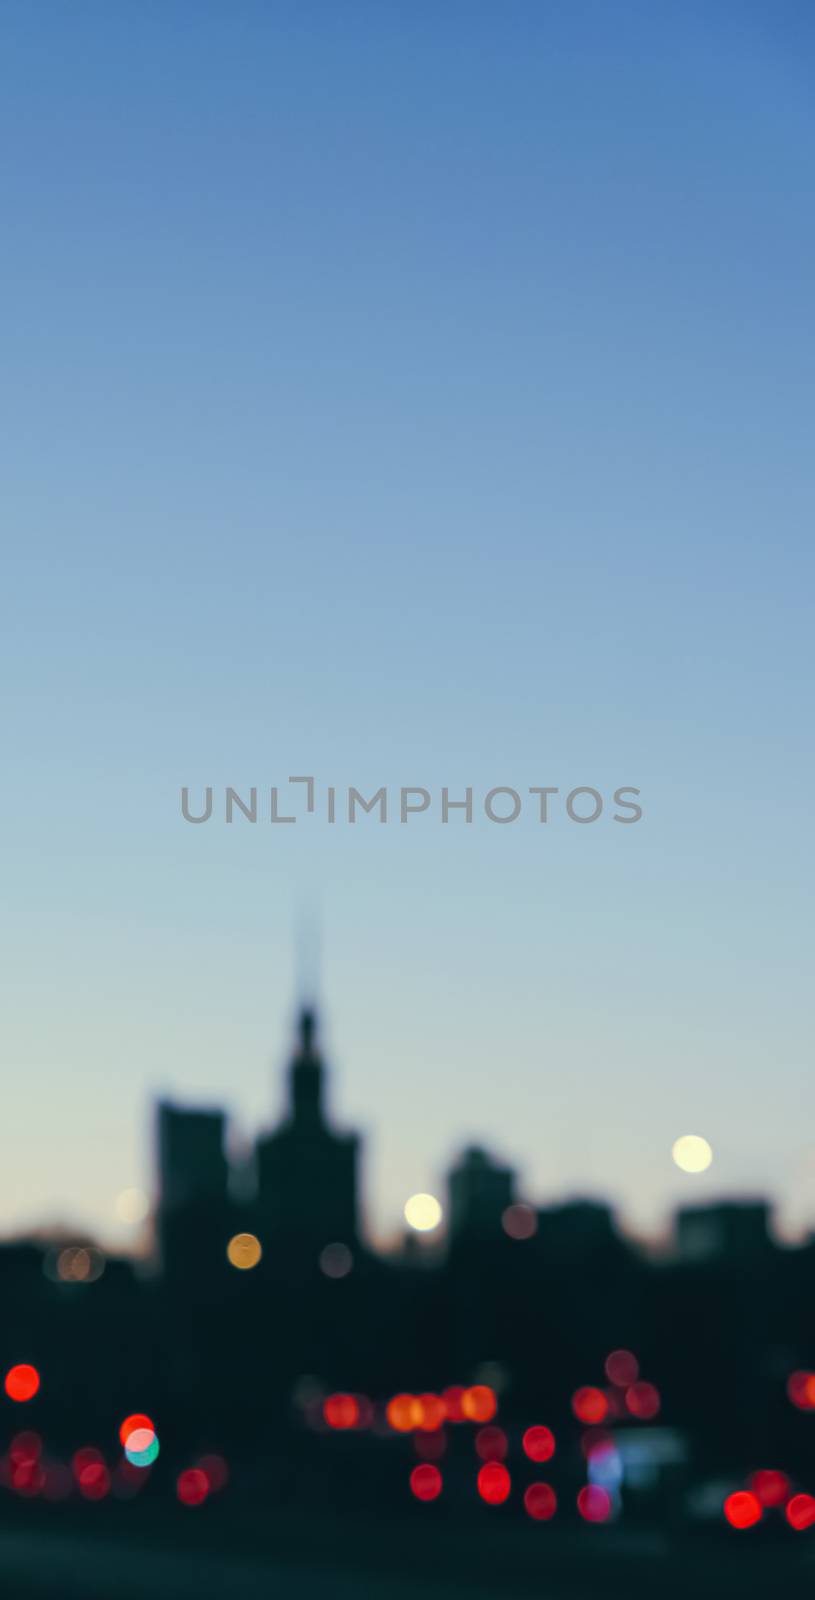 Blurry cityscape silhouette of a European city as background, evening view of Warsaw, Poland